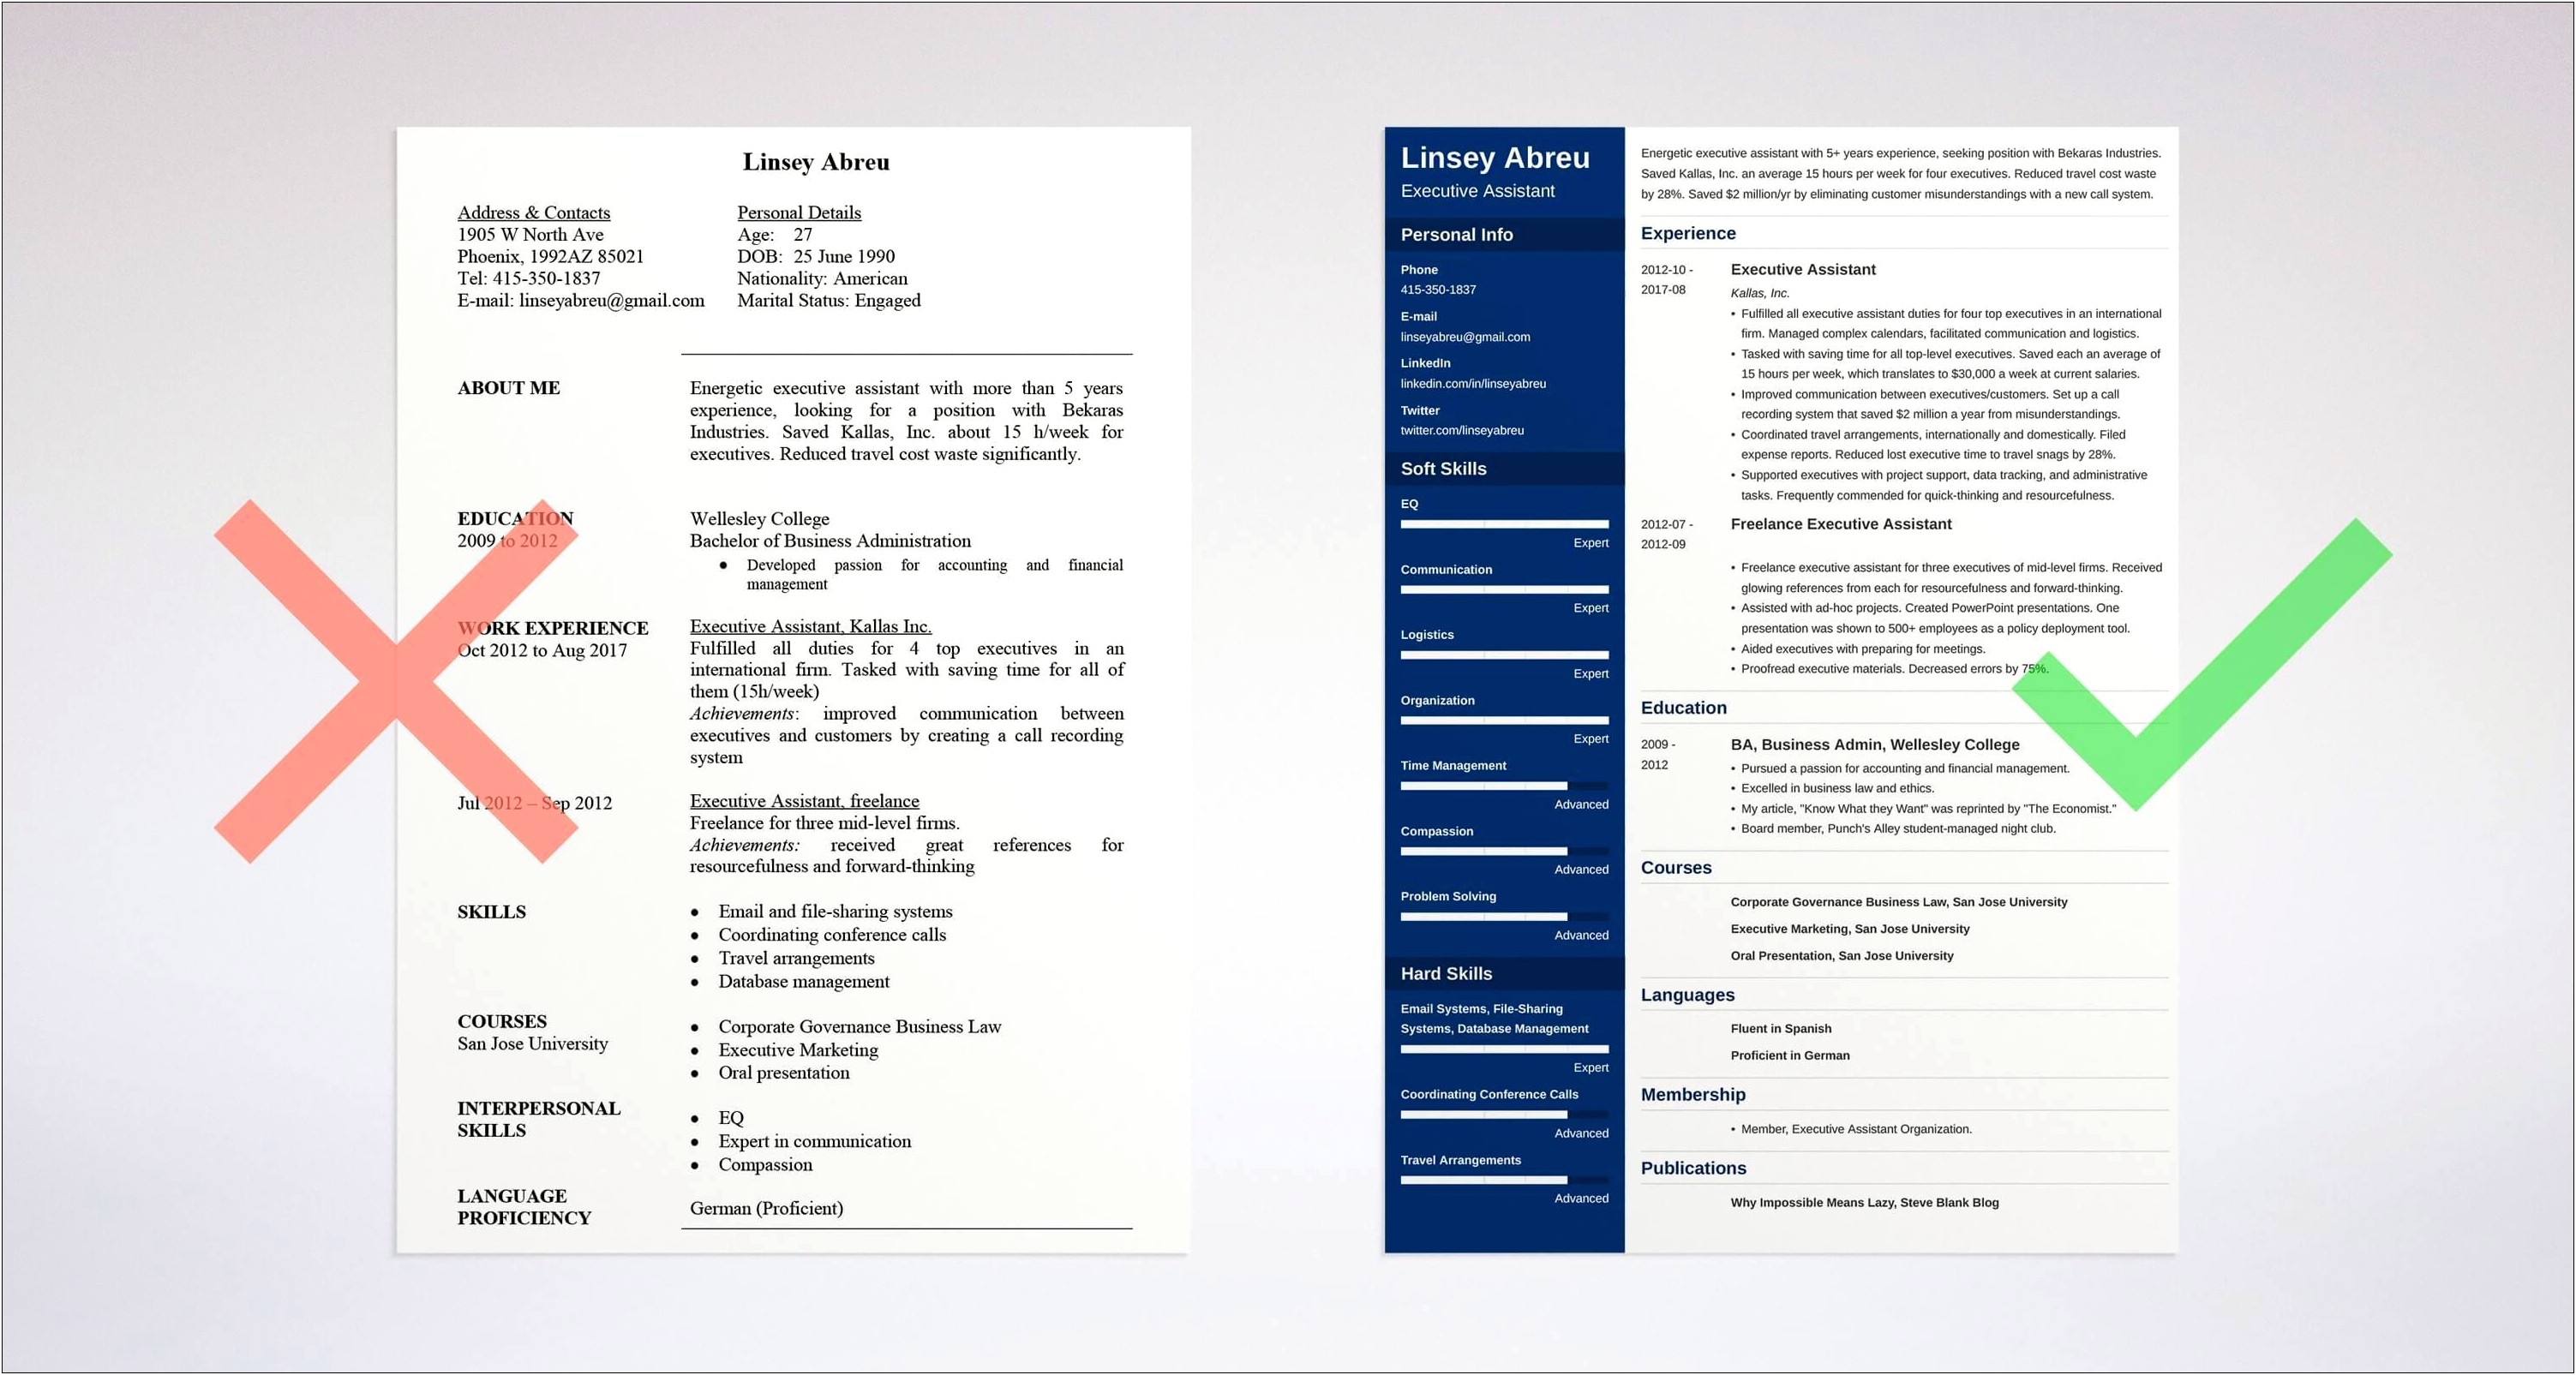 Best Executive Assistant Resume 2018